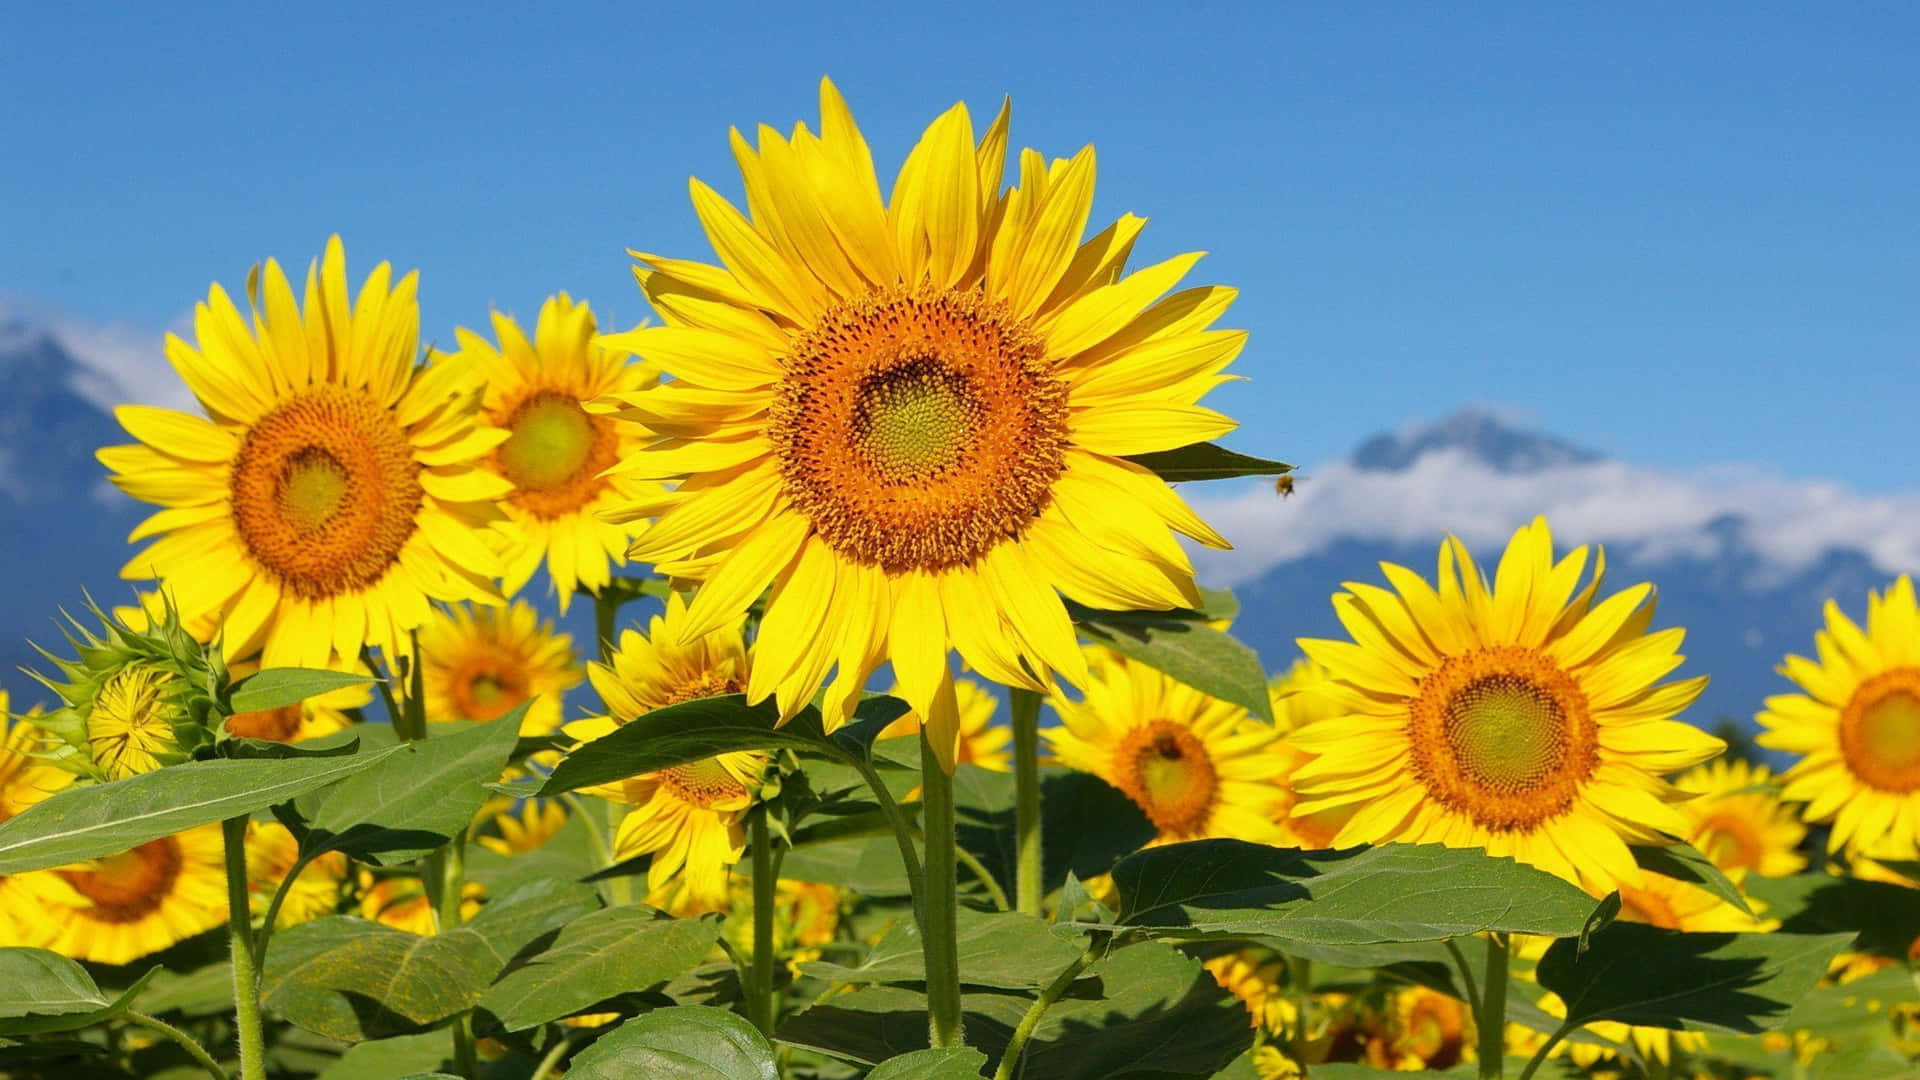 sunflowers in a field with mountains in the background